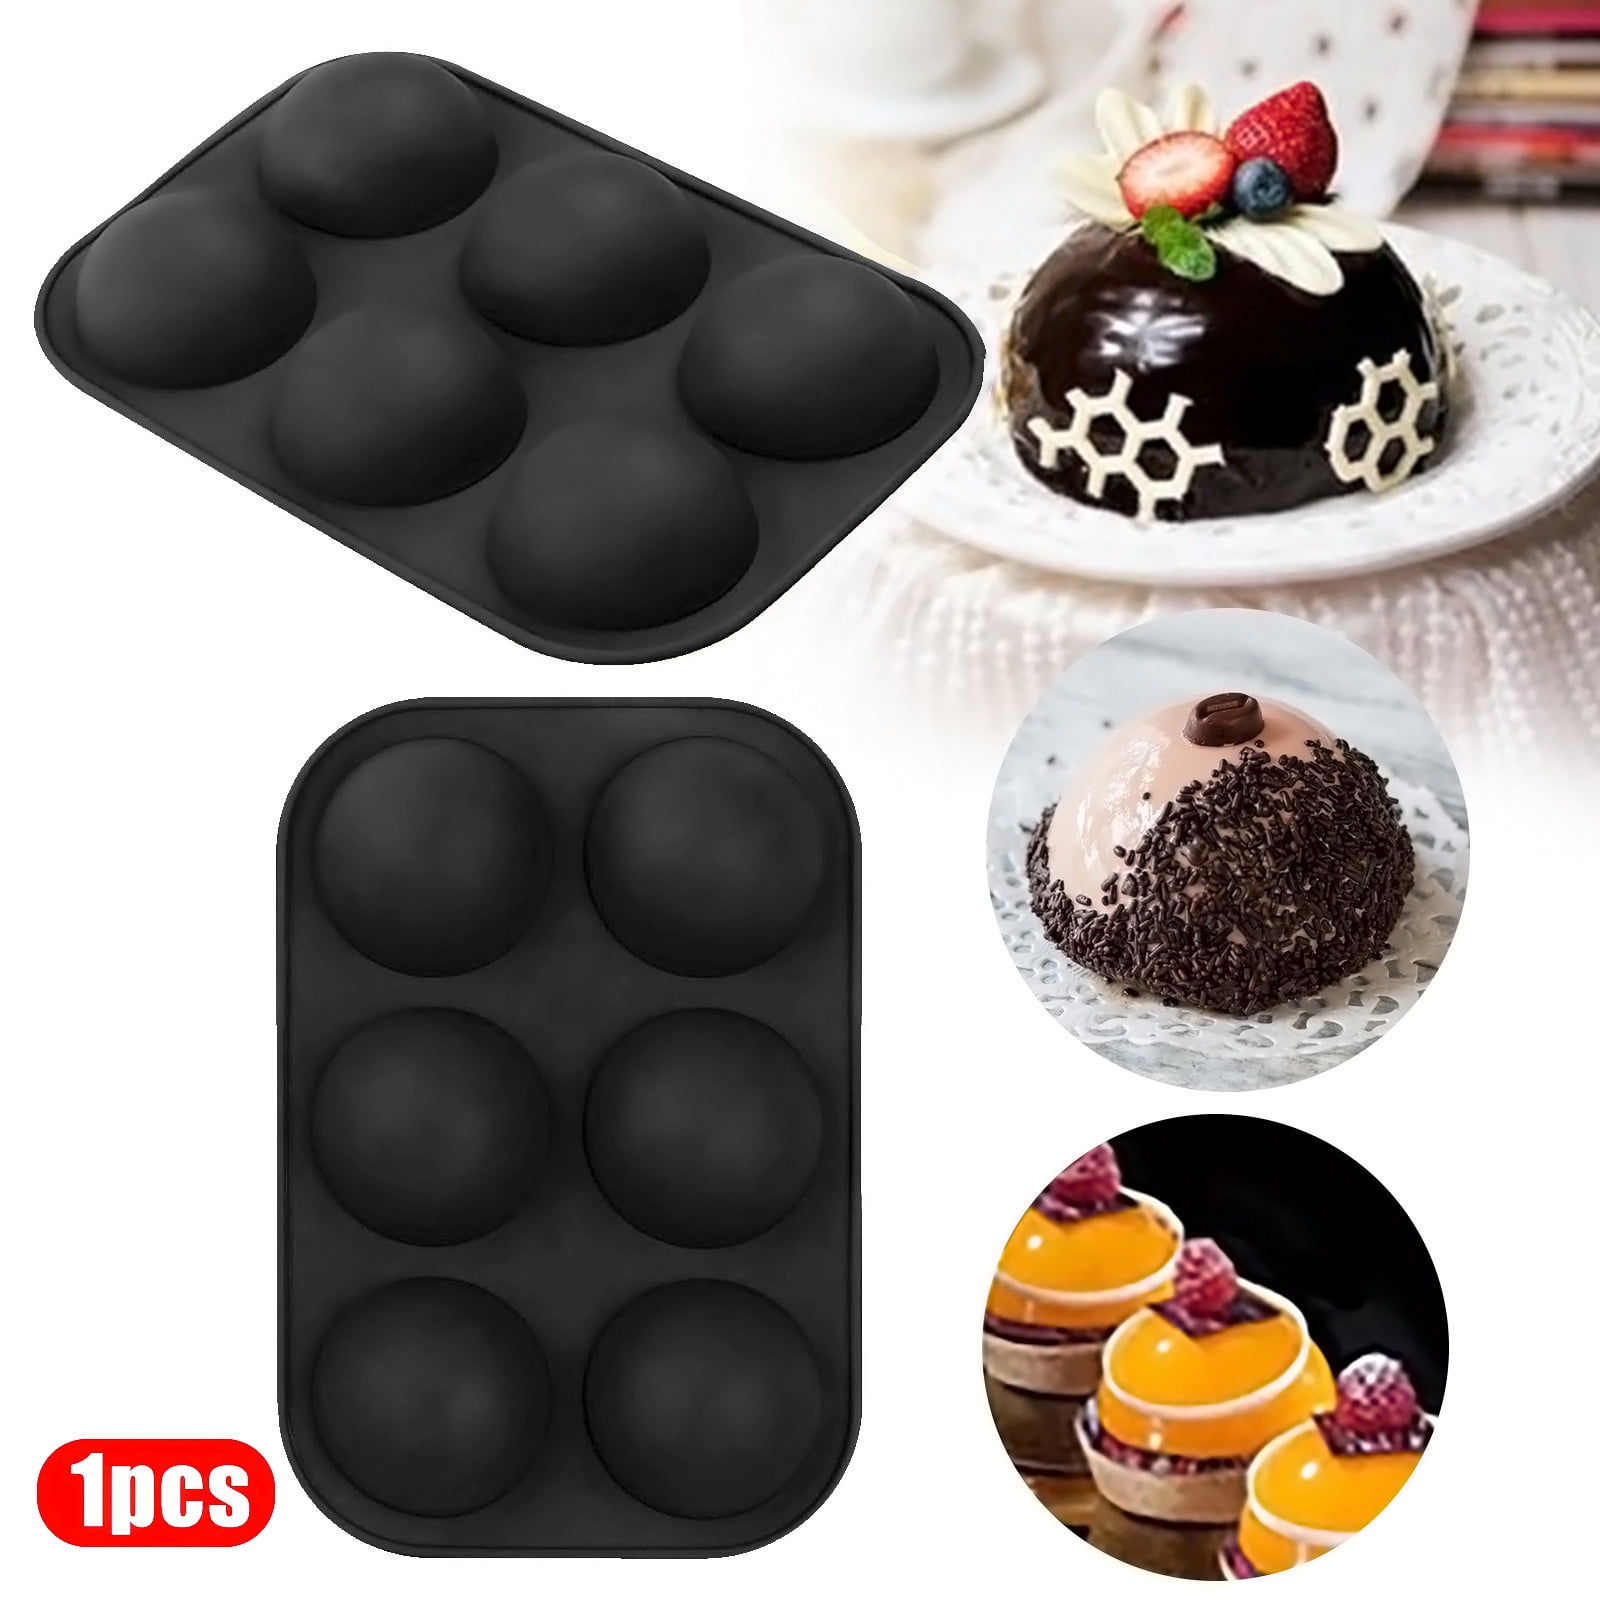 Half Ball Sphere Silicone Cake Mold Muffin Chocolate Cookie Baking Mould Pan U